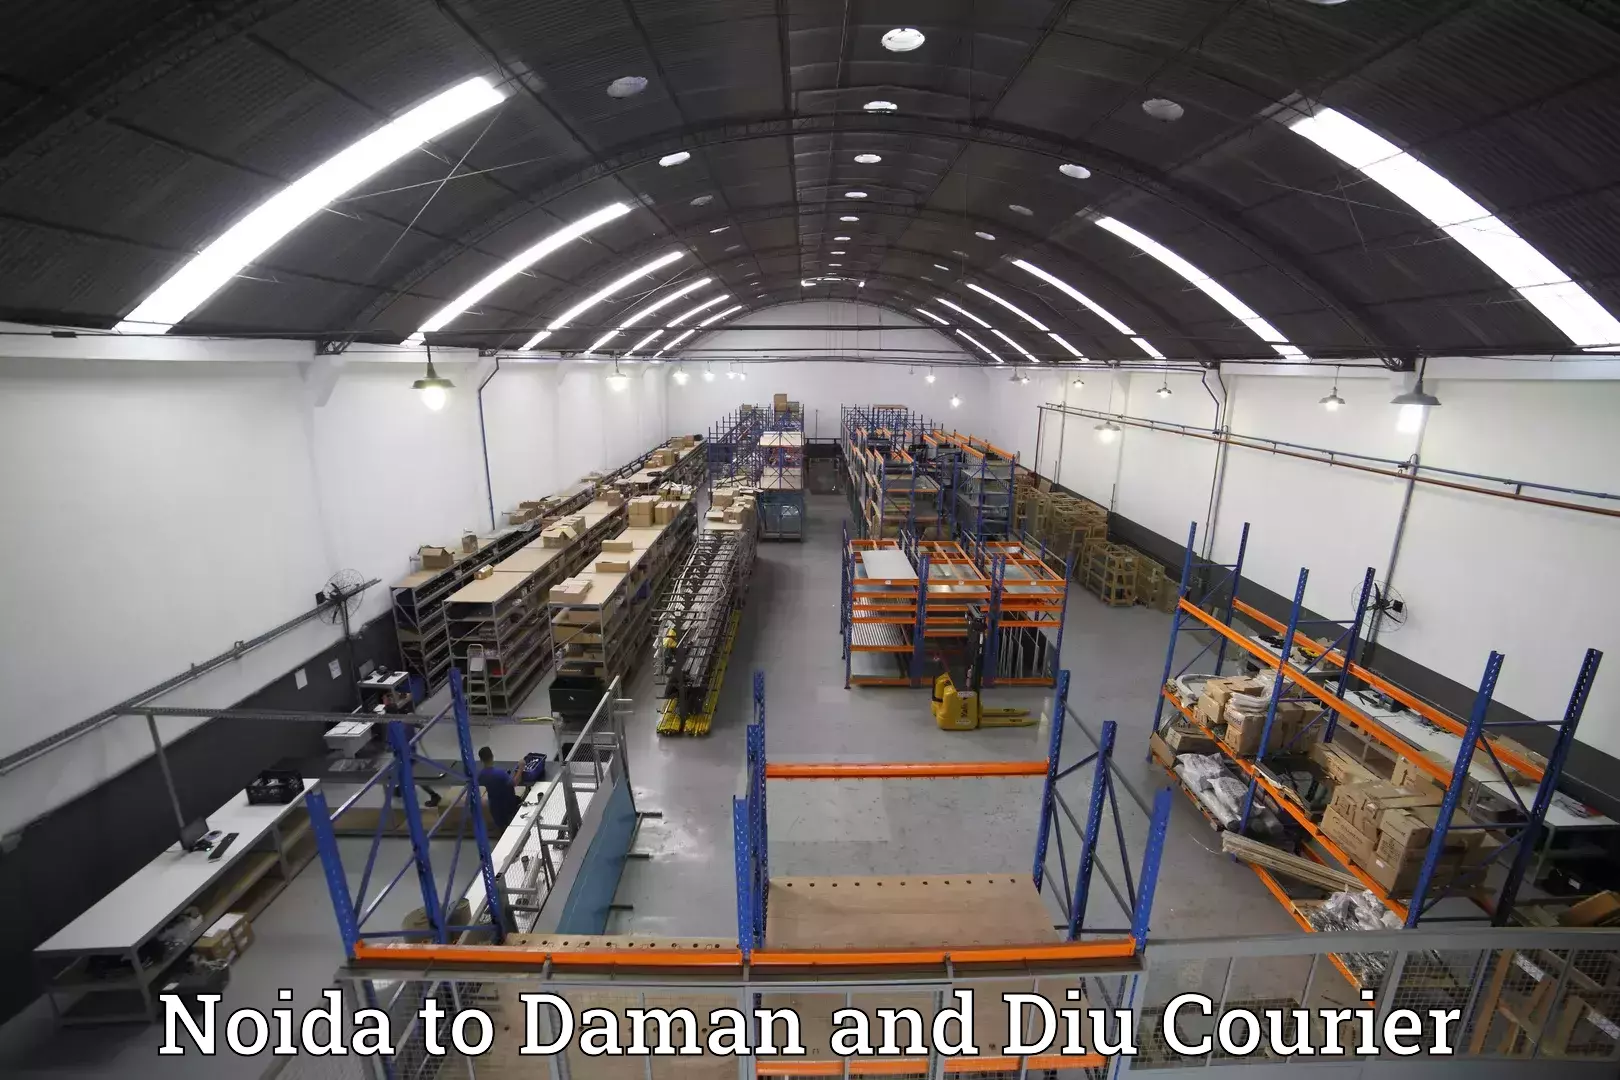 Luggage transport operations Noida to Daman and Diu